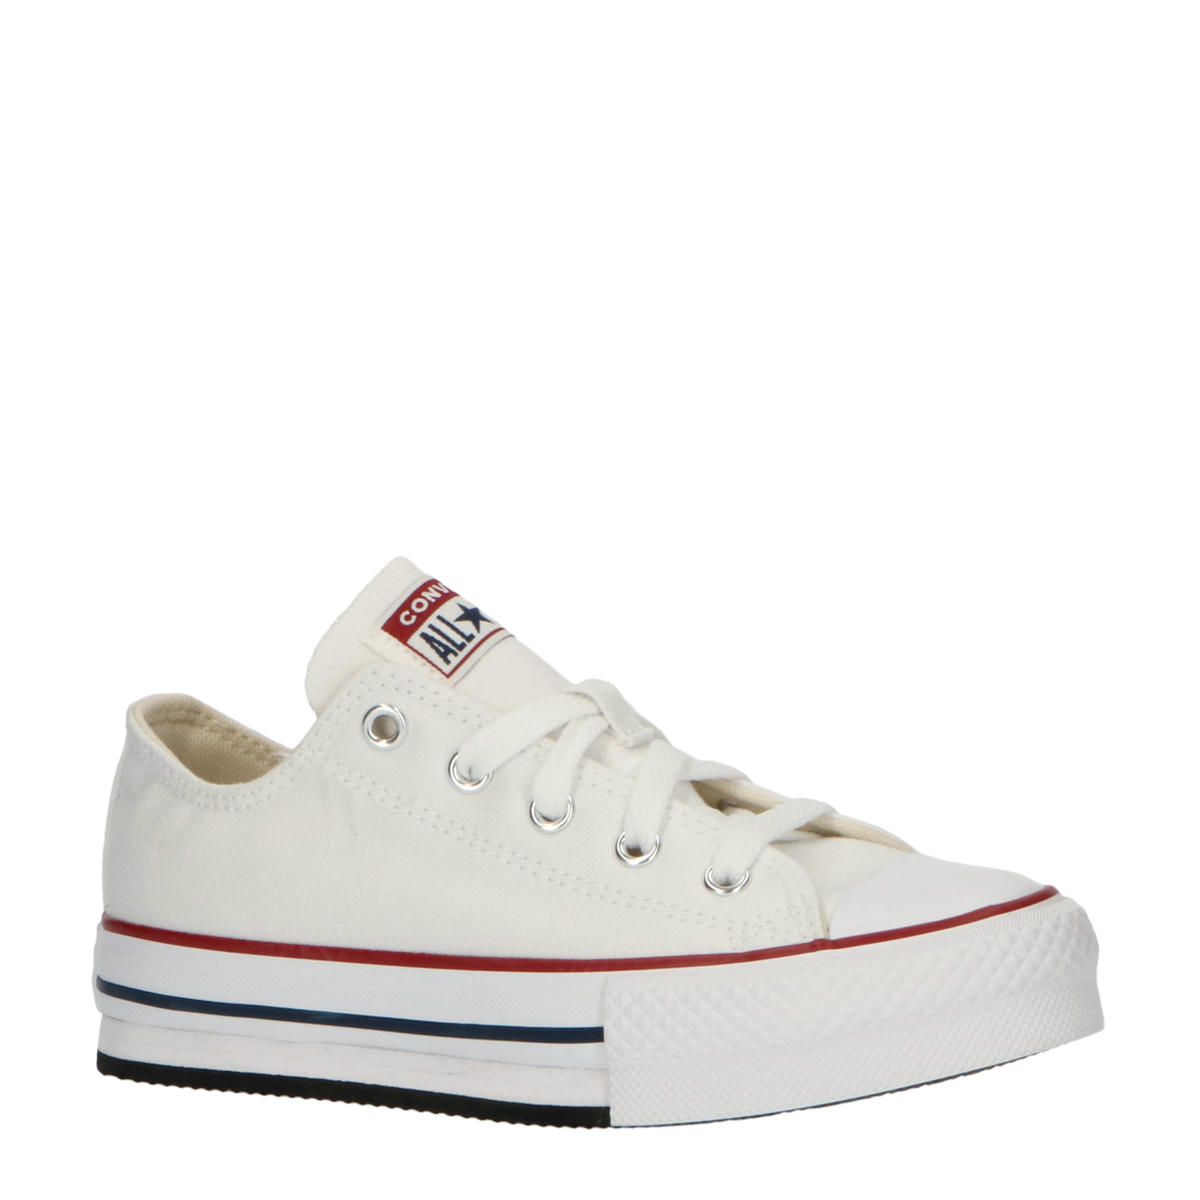 Betreffende Malawi Of Converse Chuck Taylor All Star Eva sneakers wit/donkerrood/donkerblauw |  wehkamp